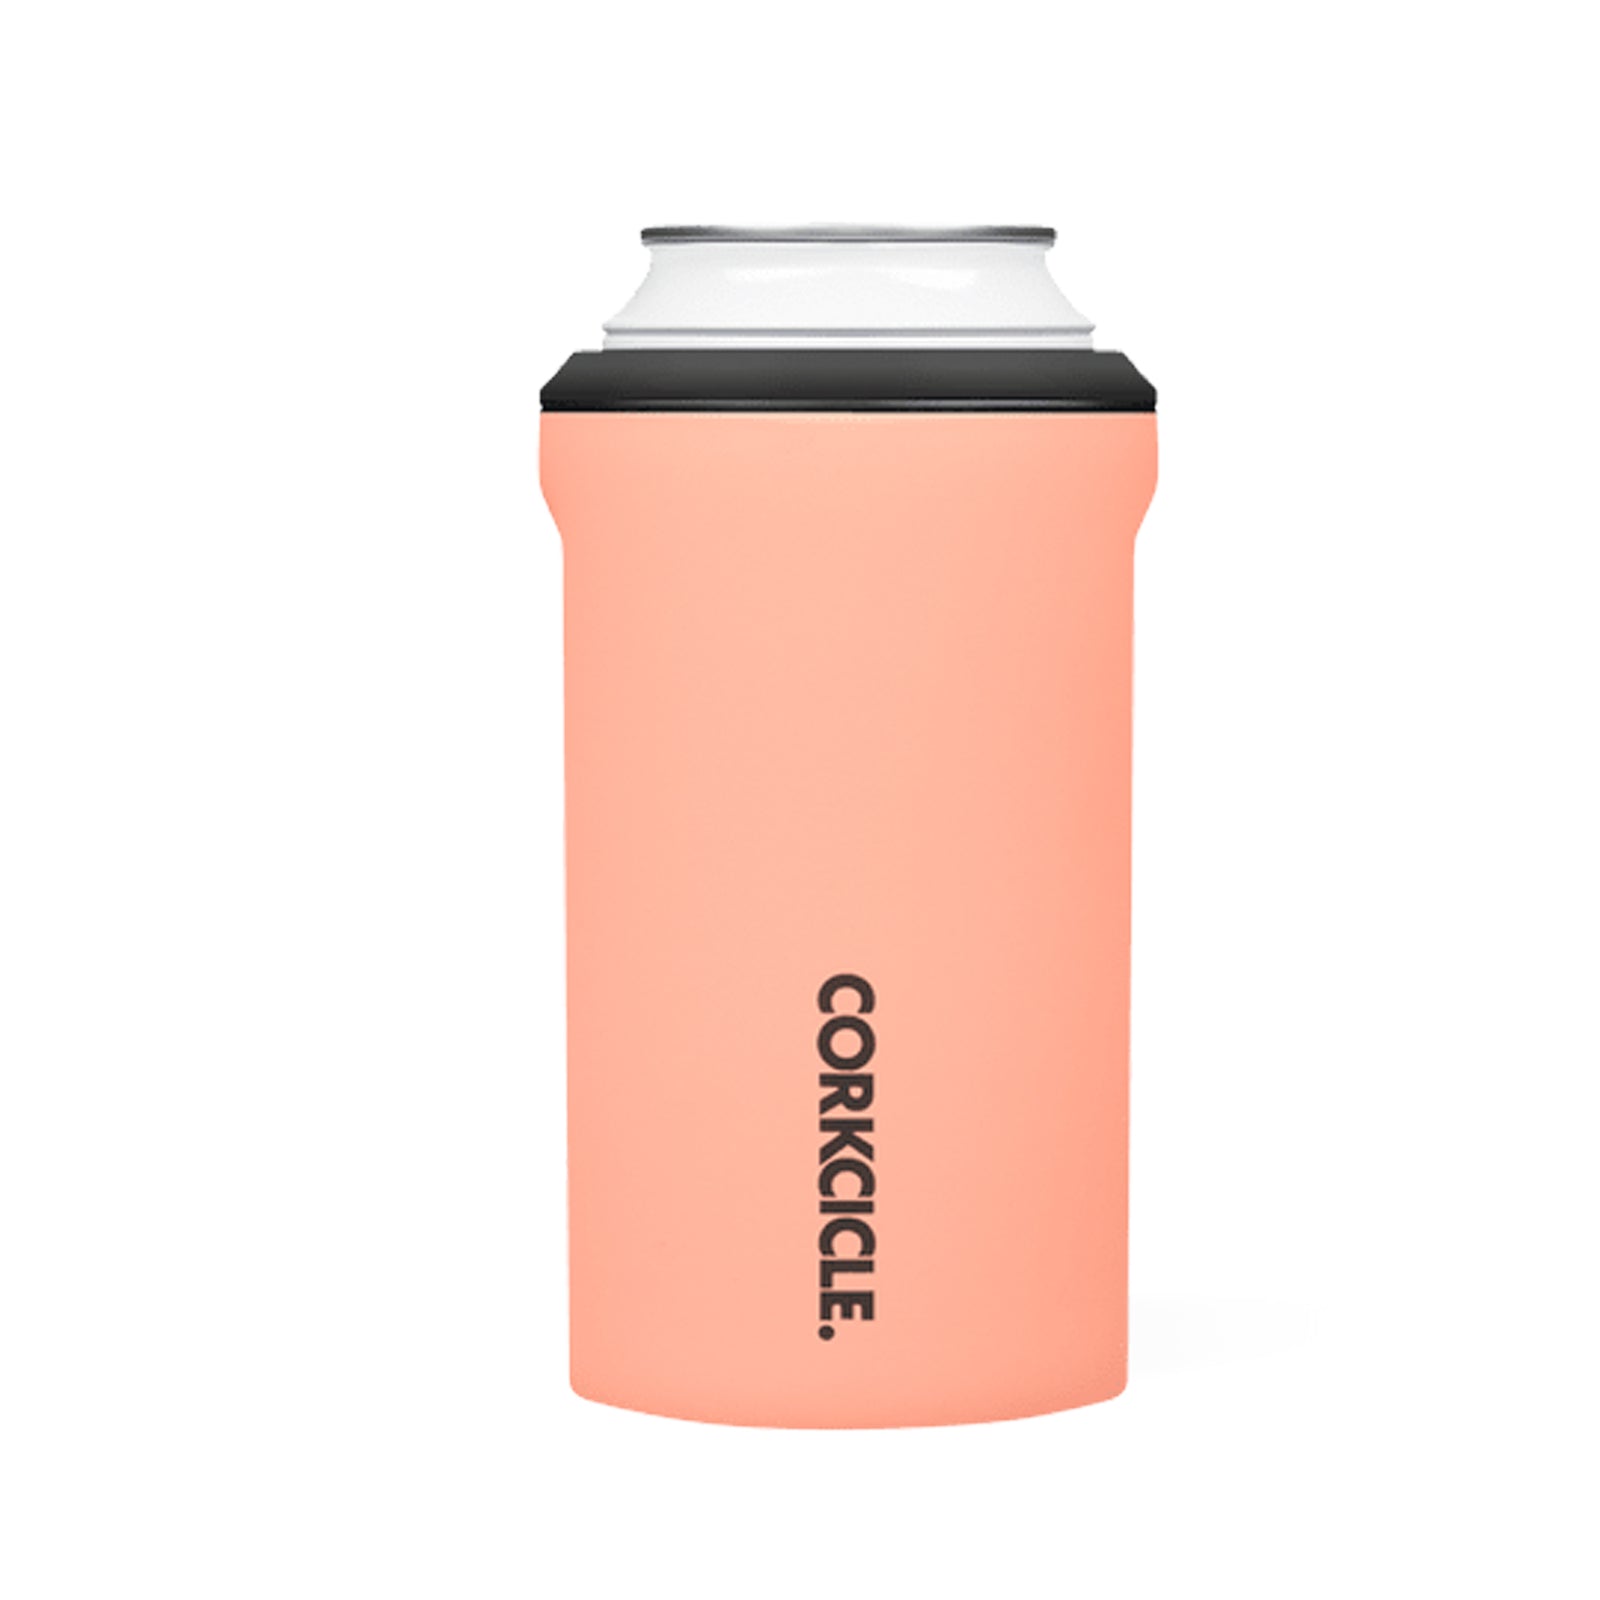 https://cdn.shopify.com/s/files/1/0003/1902/9309/products/corkcicle-can-cooler-neon-lights-coral_1600x.jpg?v=1647971957